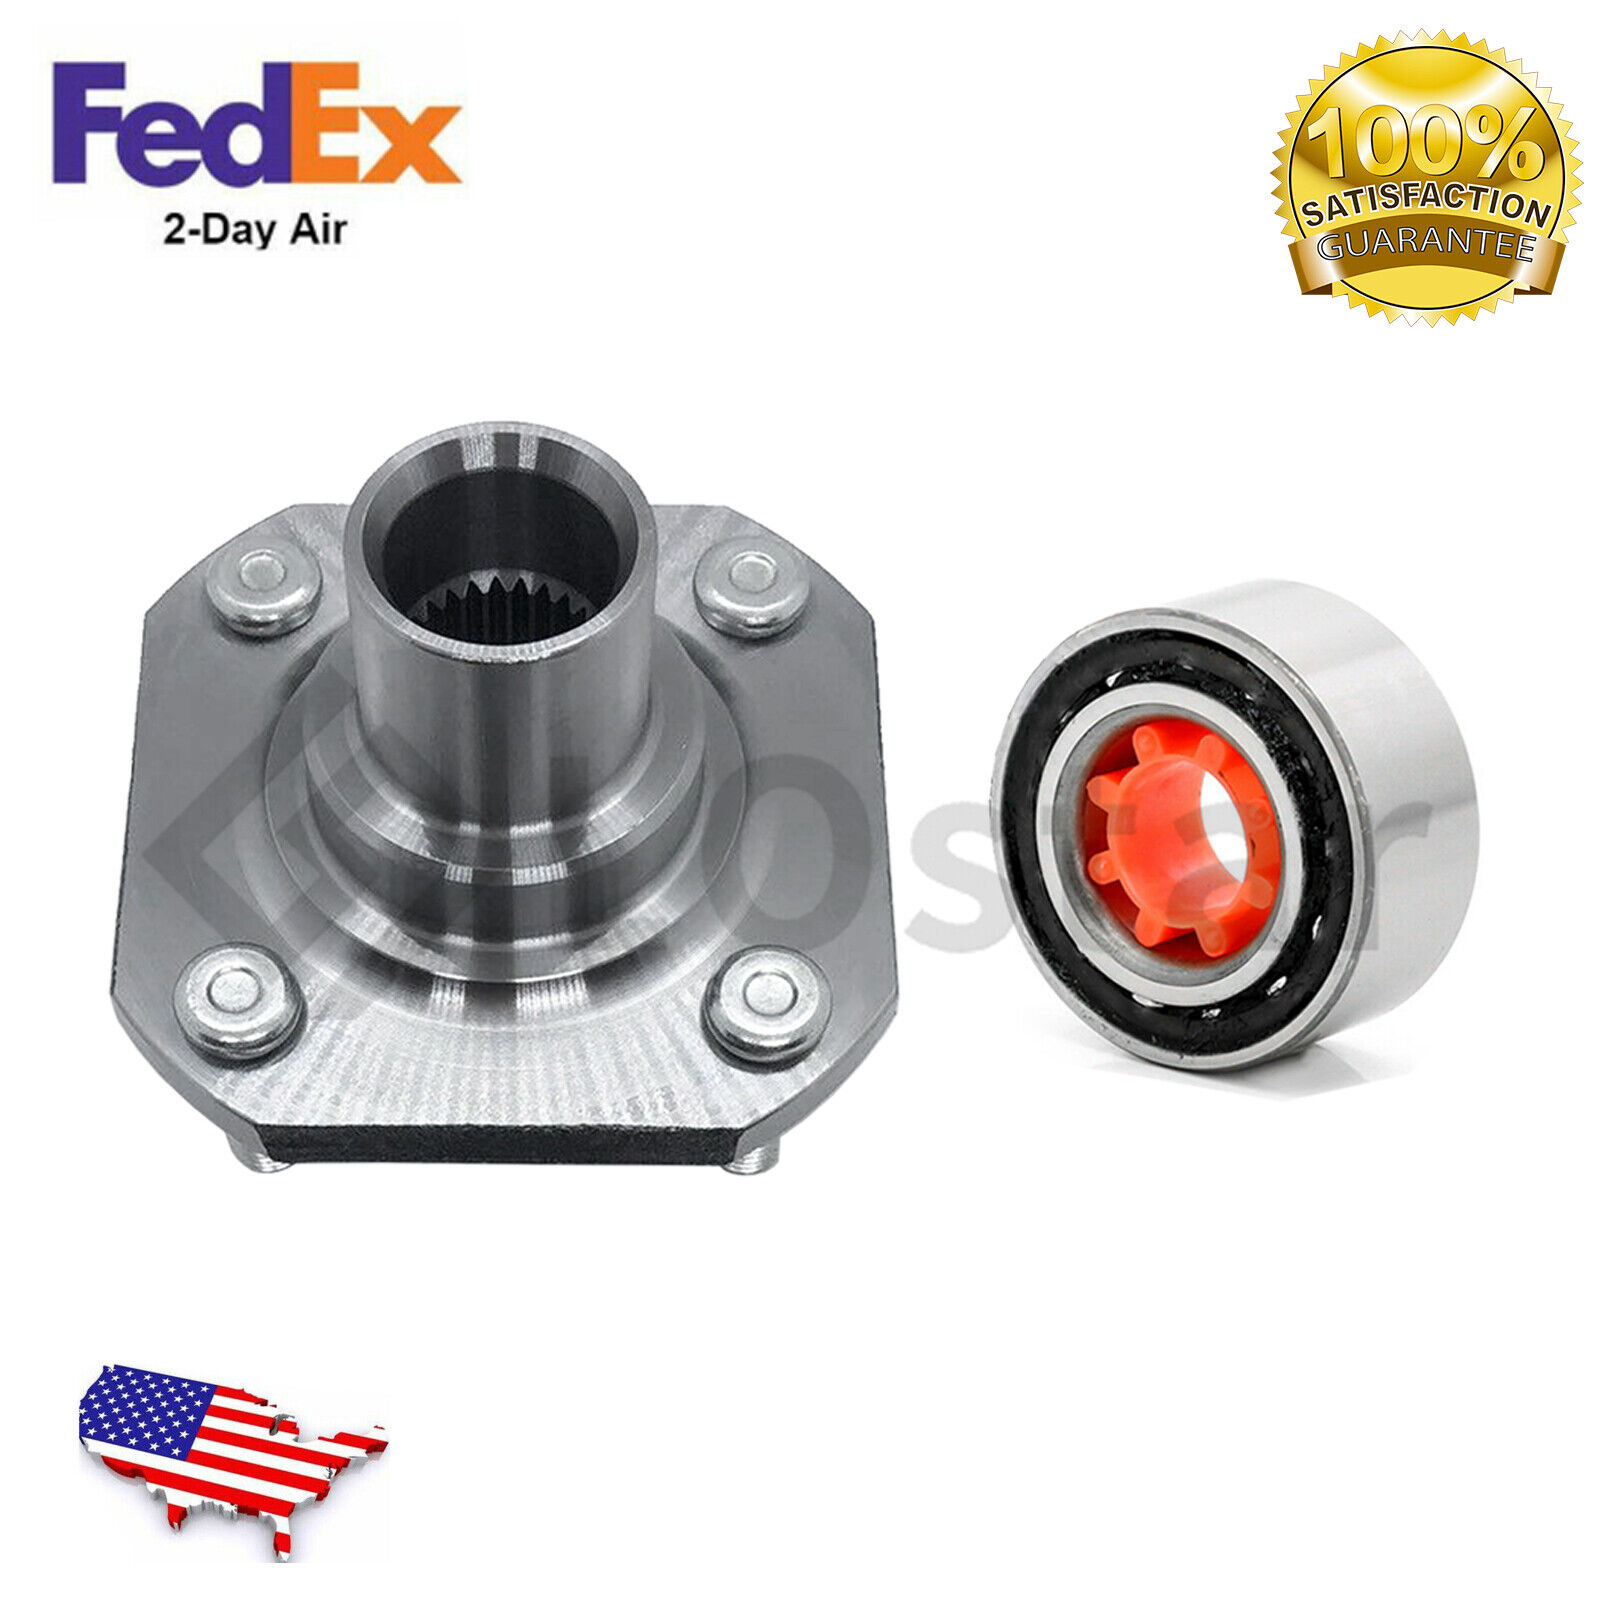 New Front Wheel Hub and Bearing Assembly Fits Toyota Paseo Tercel